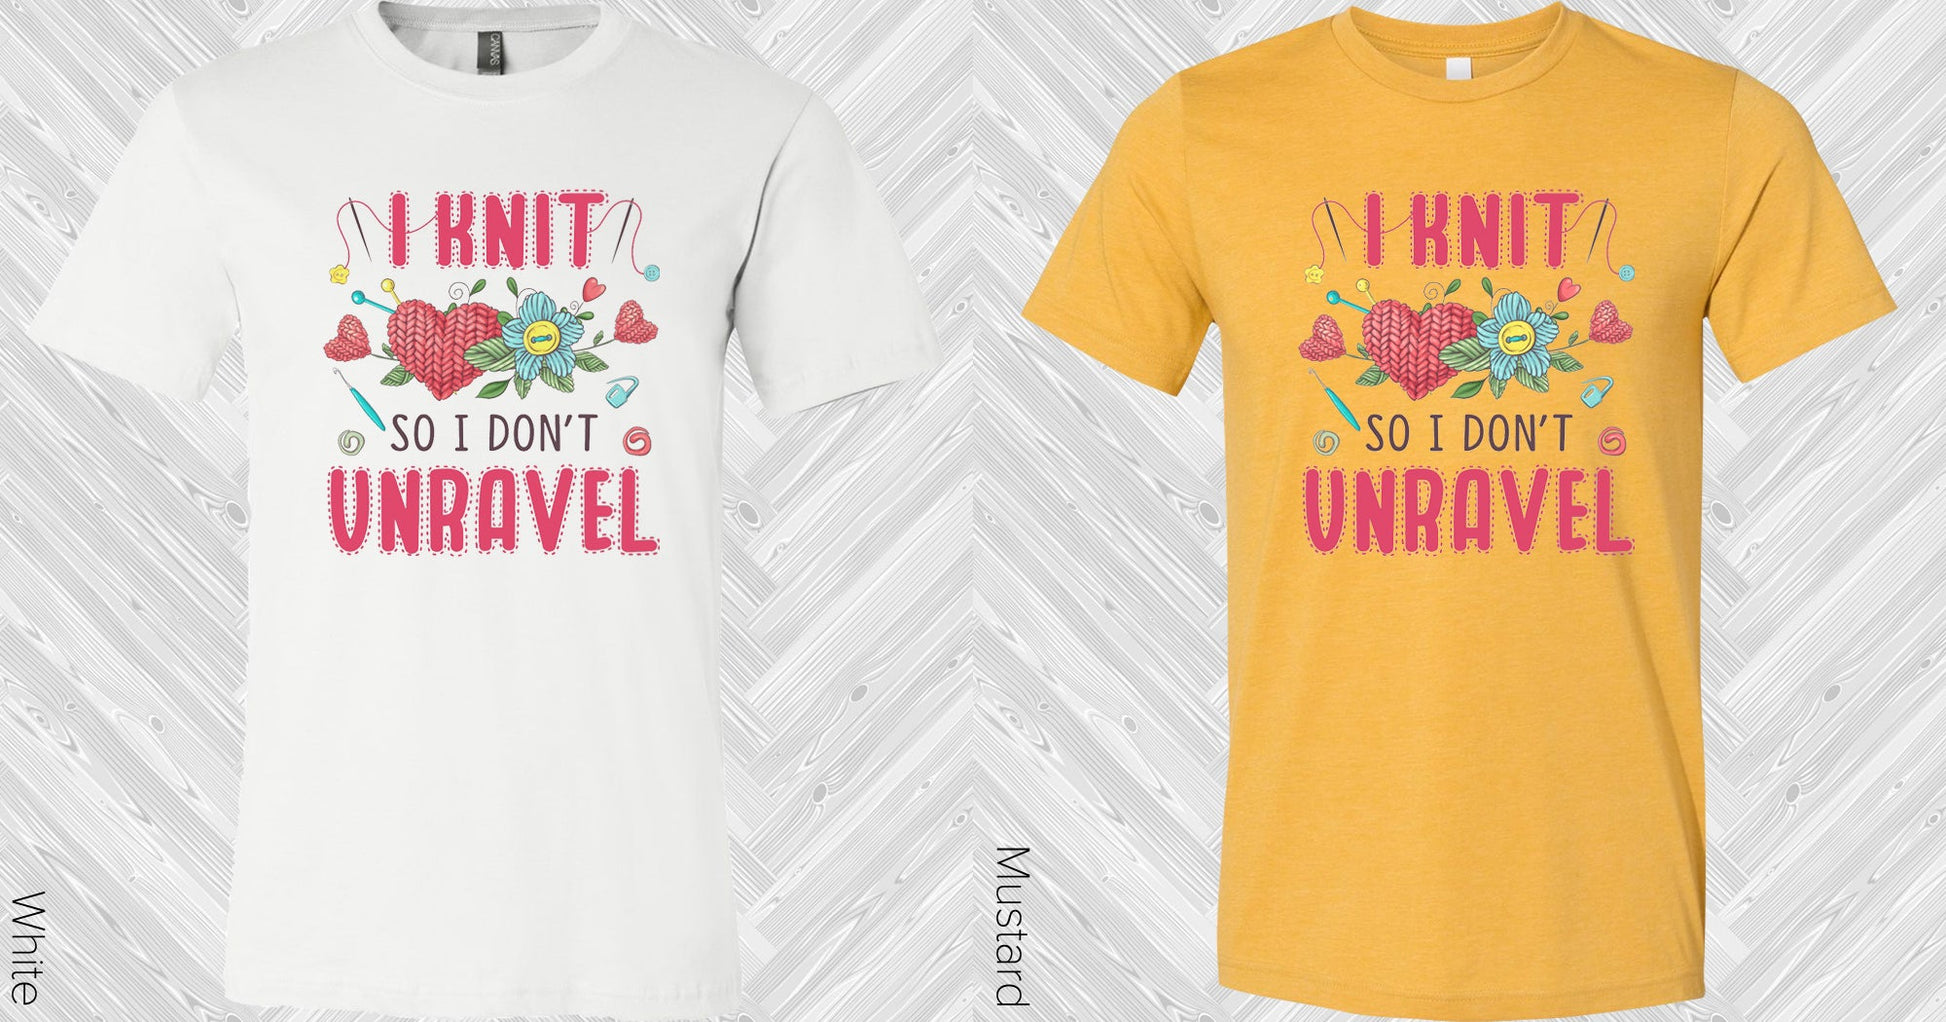 I Knit So Dont Unravel Graphic Tee Graphic Tee